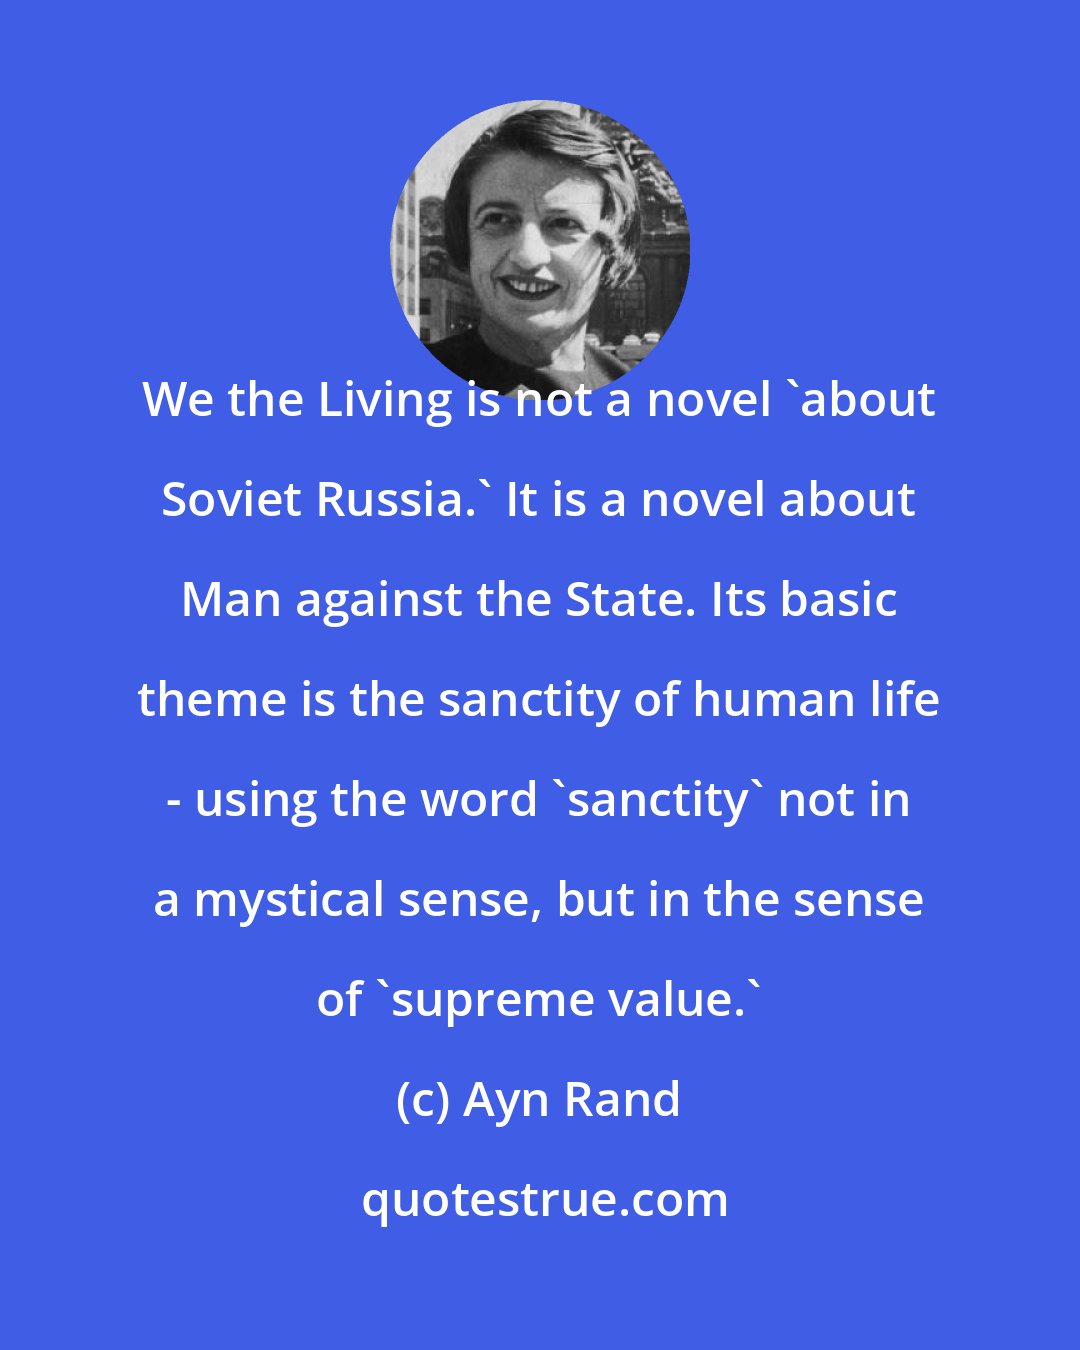 Ayn Rand: We the Living is not a novel 'about Soviet Russia.' It is a novel about Man against the State. Its basic theme is the sanctity of human life - using the word 'sanctity' not in a mystical sense, but in the sense of 'supreme value.'